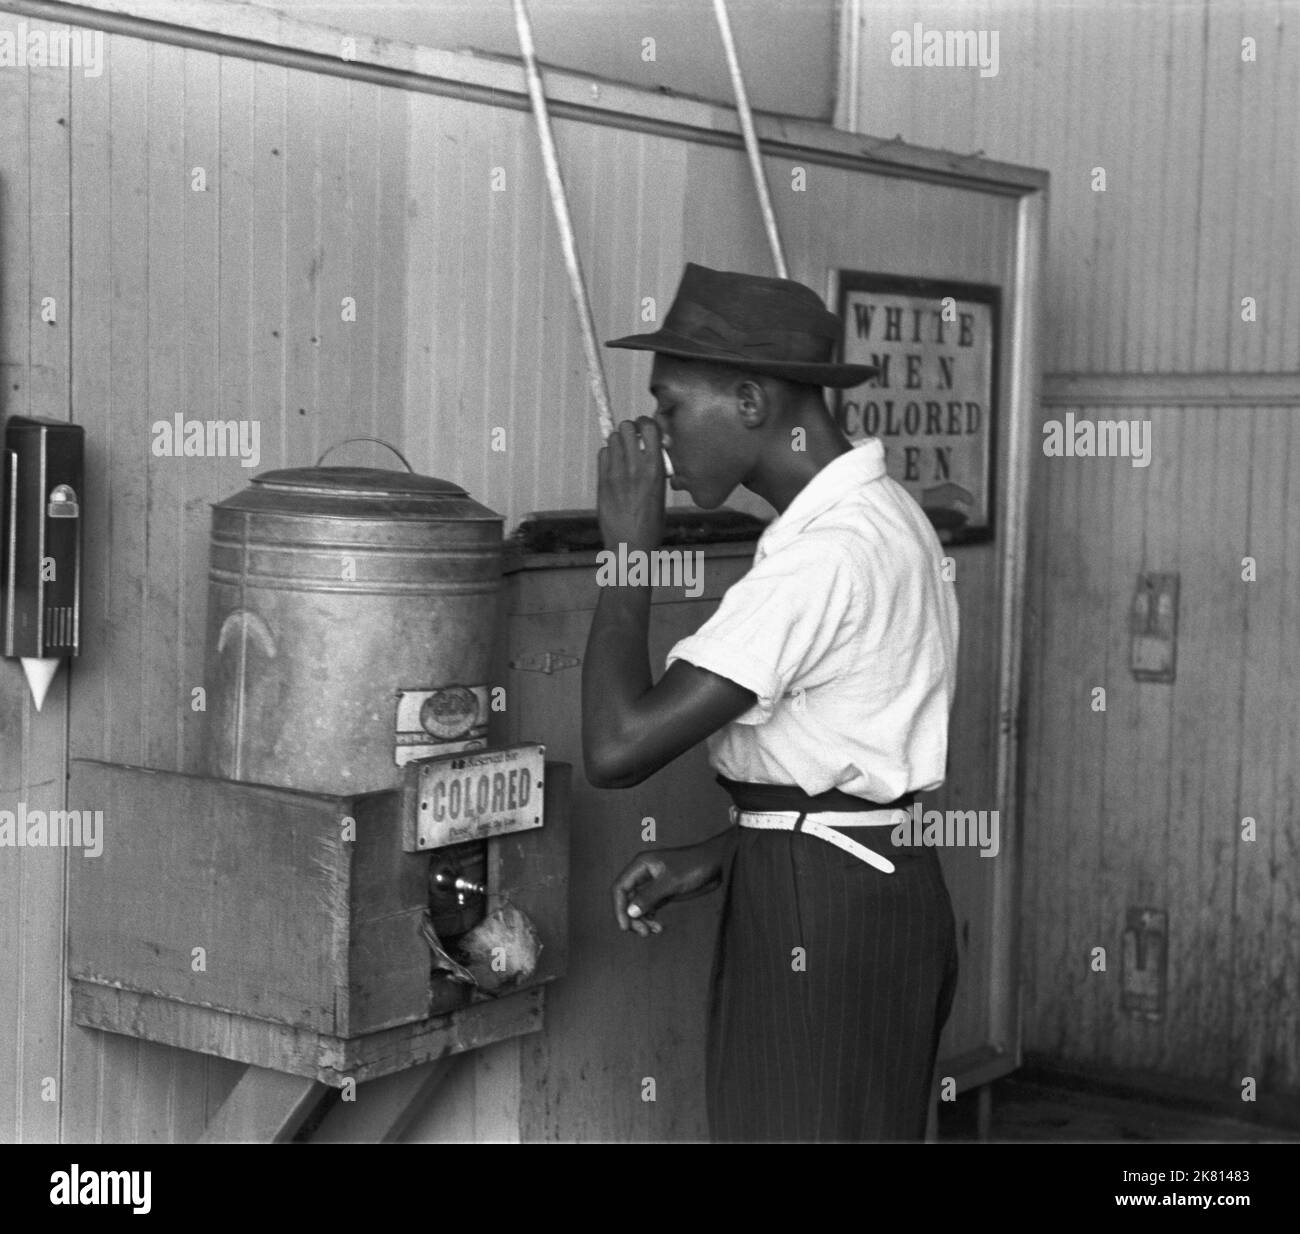 Russell Lee - Drinking Fountain - Segregation - 1939 Stock Photo